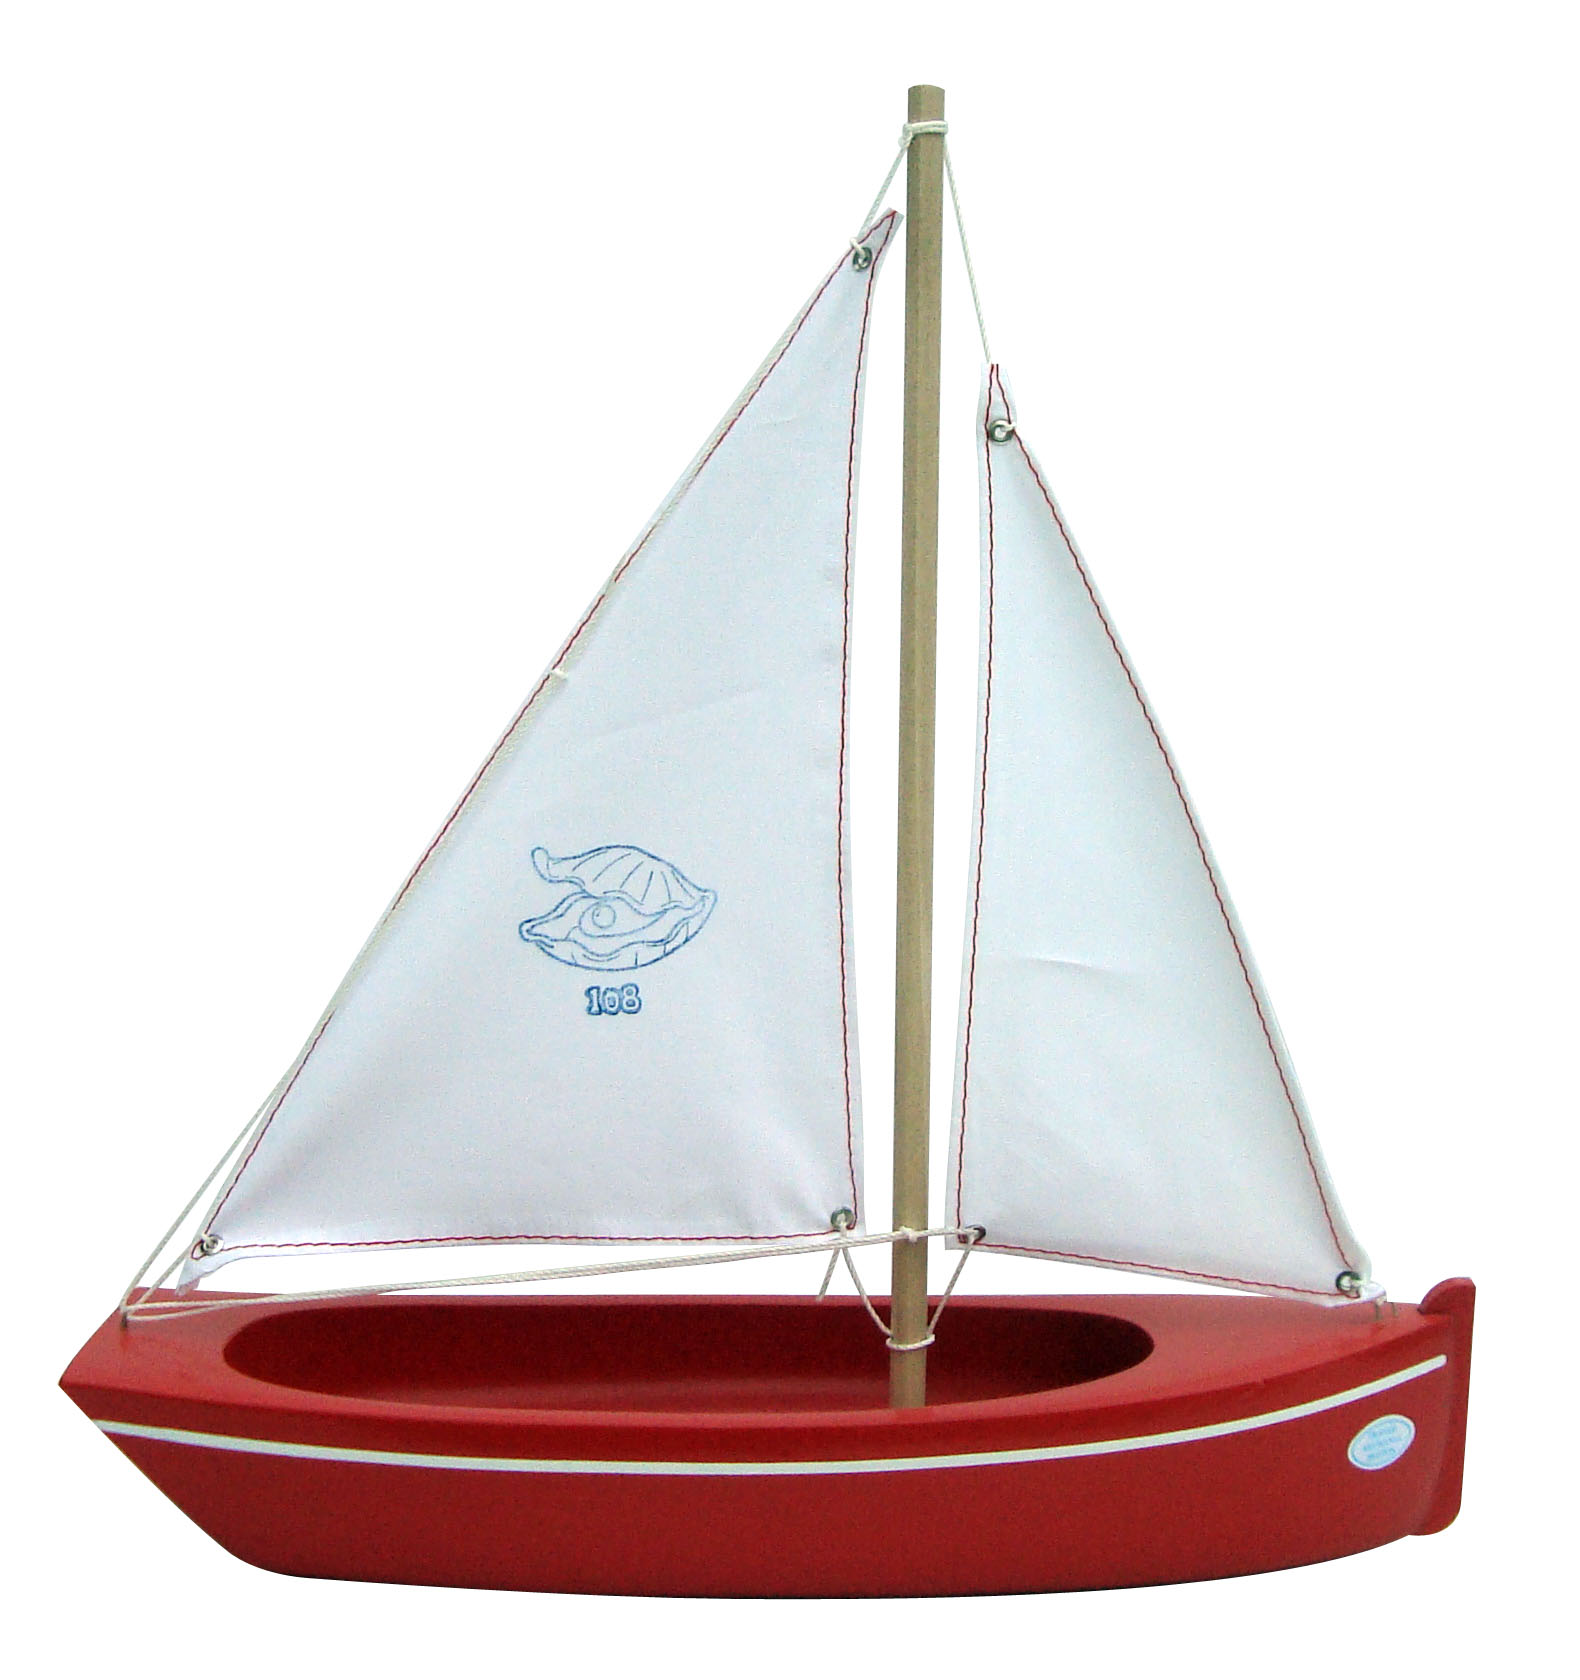 Small red toy boat. Handmade with love 